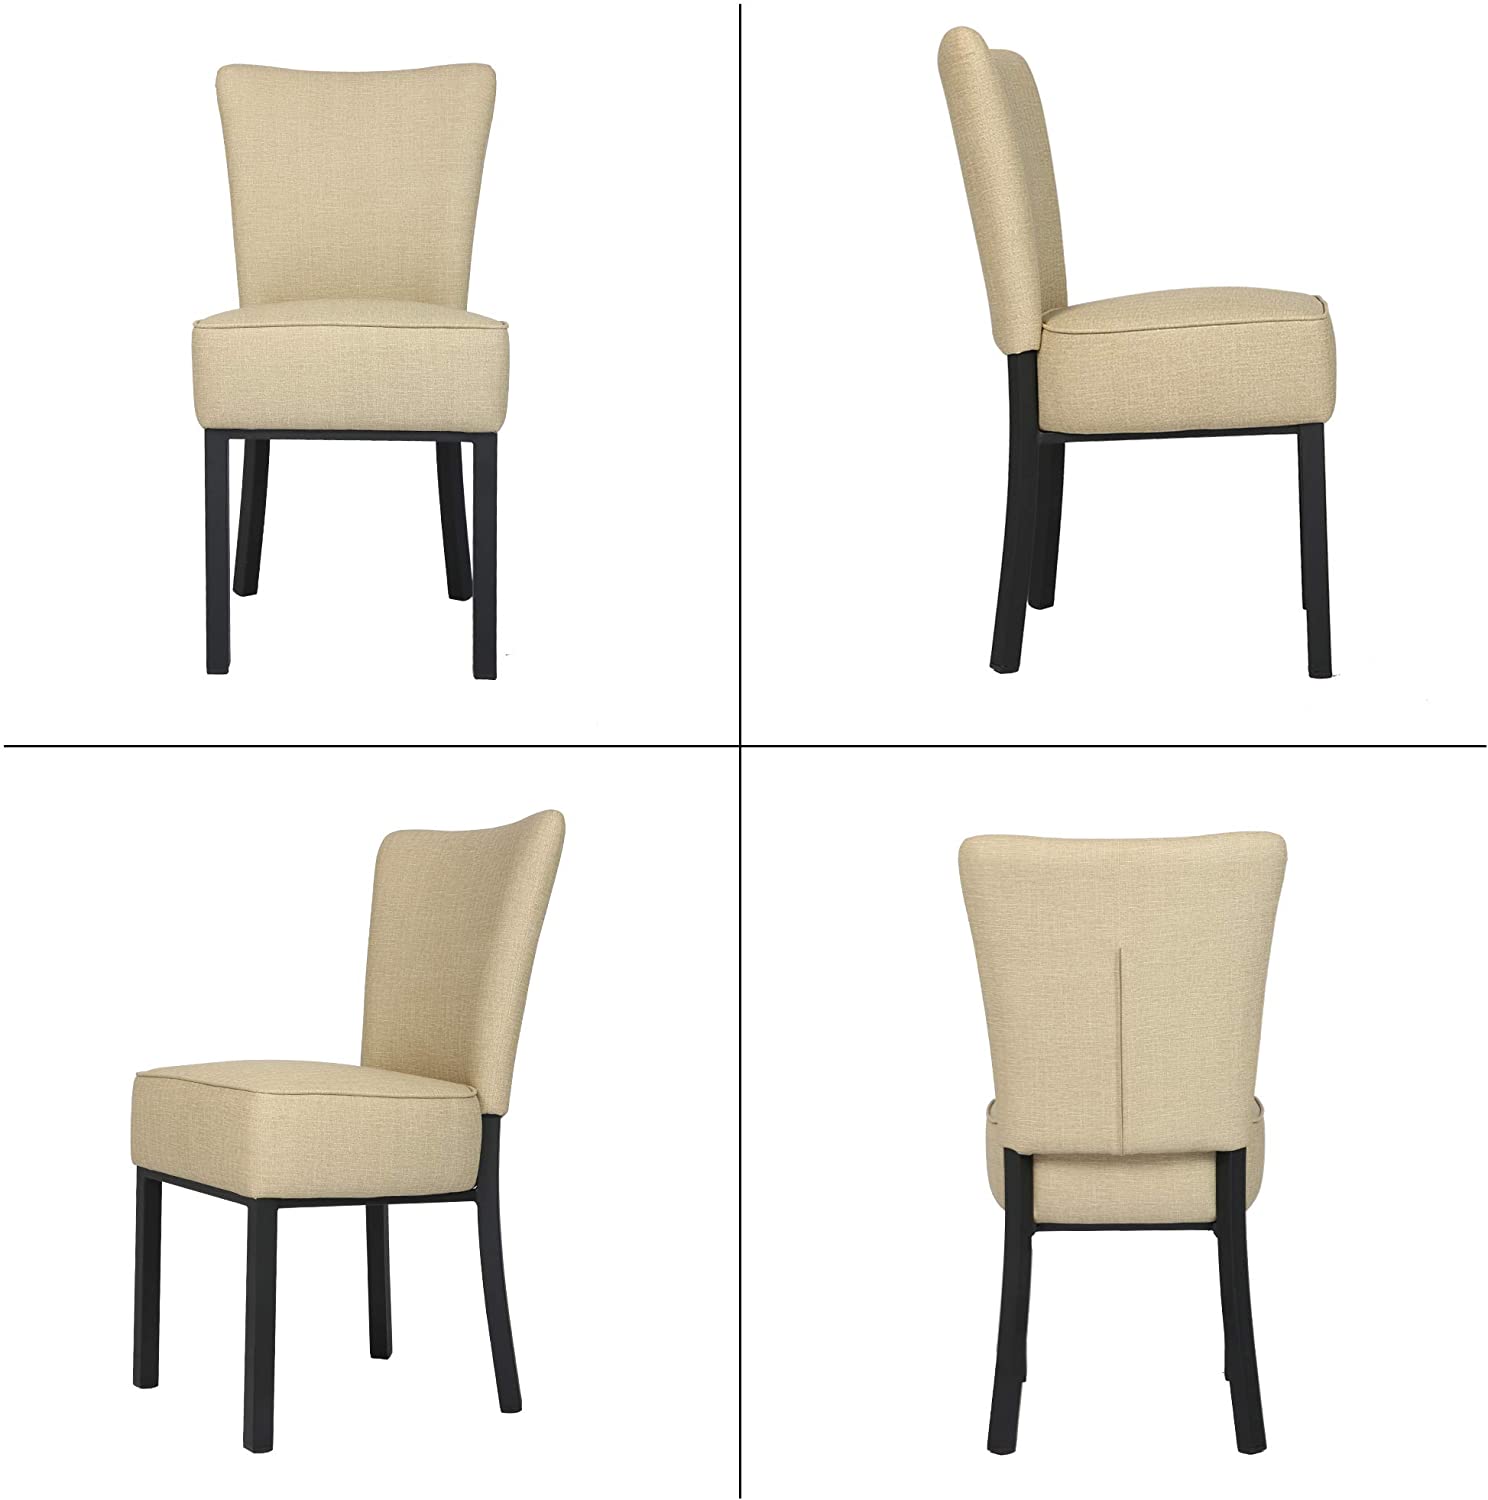 LUCKYERMORE Set of 2 Modern Dining Chairs PU Leather Side Chairs with Soft Cushion, Beige